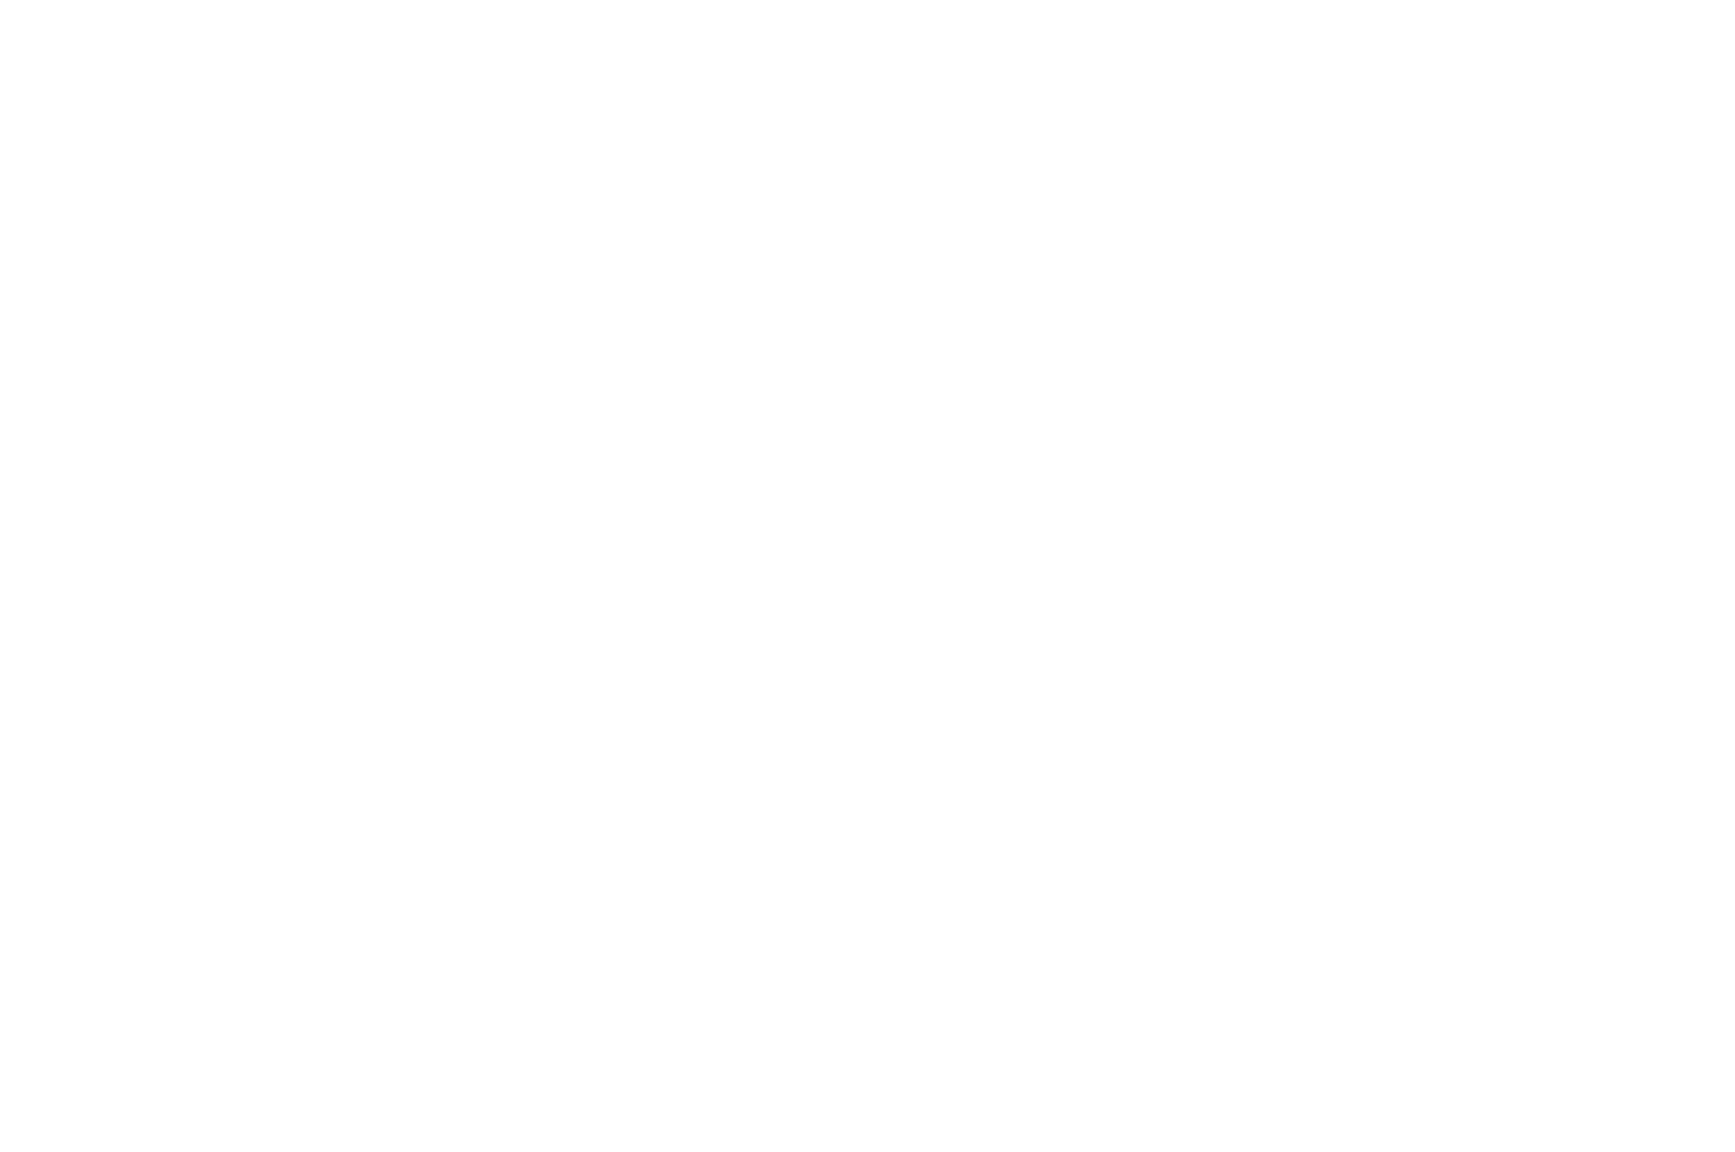 OFFICIAL SELECTION - Chicago South Asian Film Festival - 2021 (1)